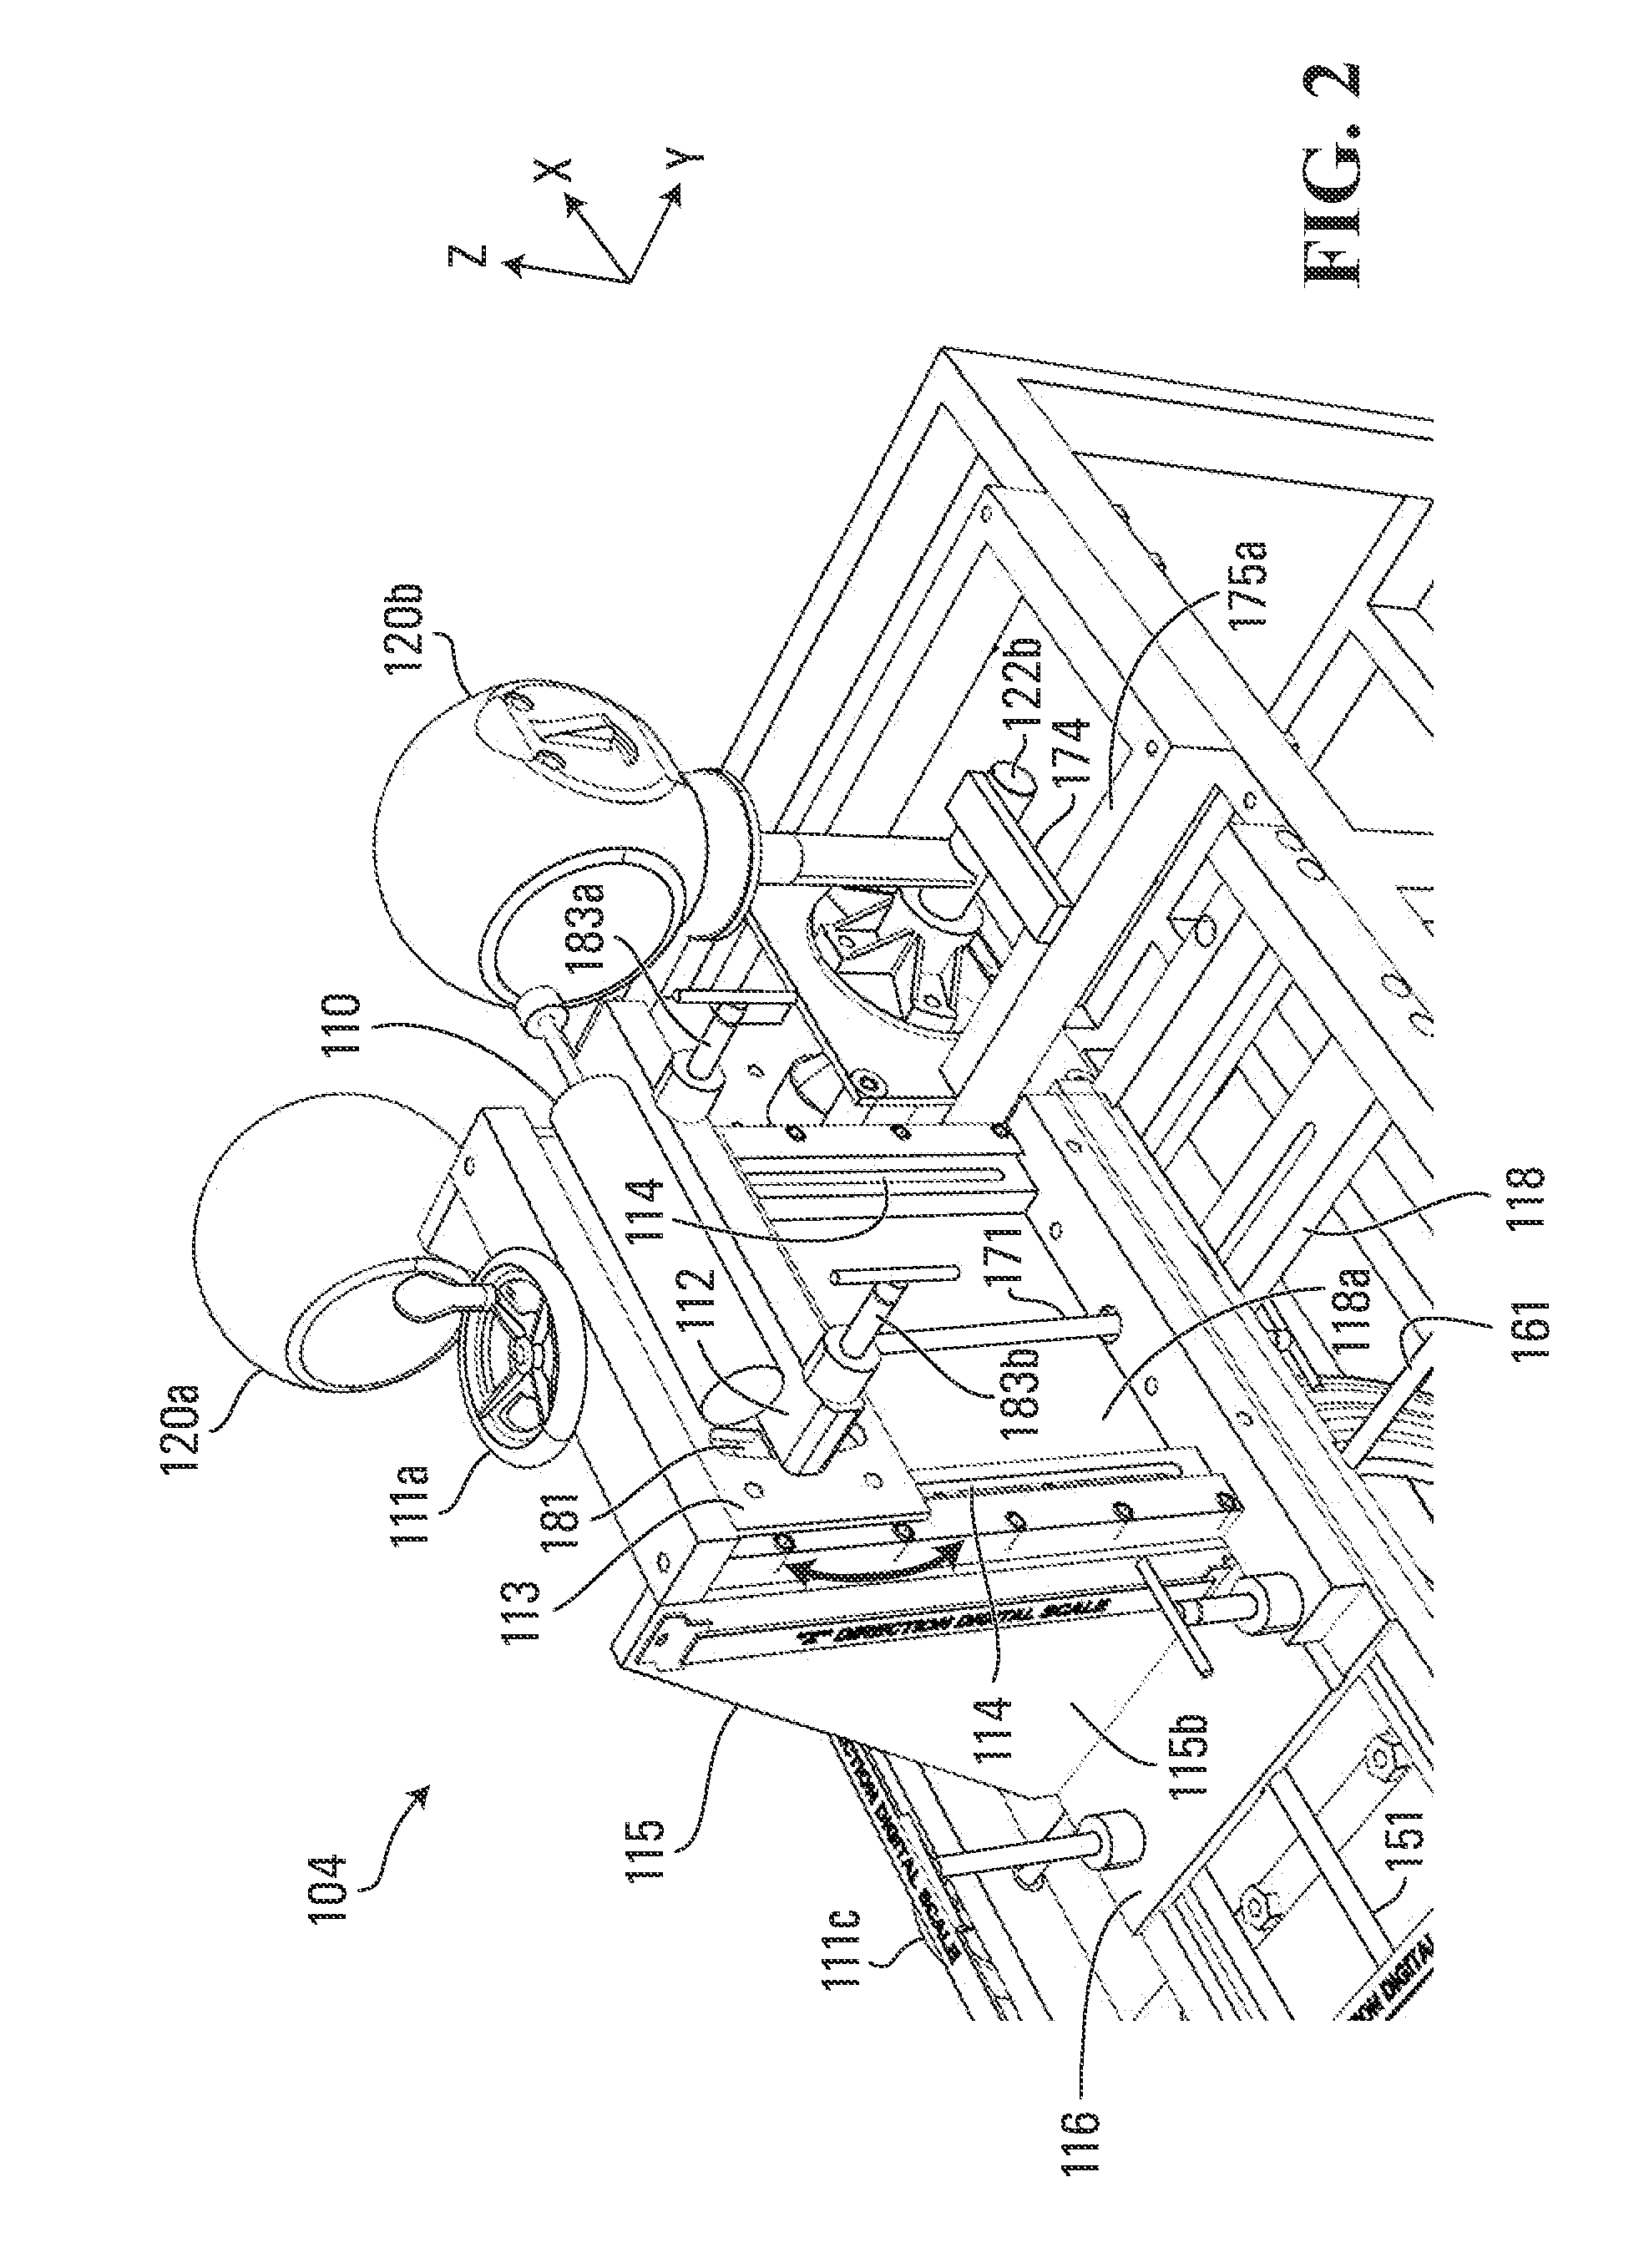 Method and apparatus for simulating head impacts for helmet testing